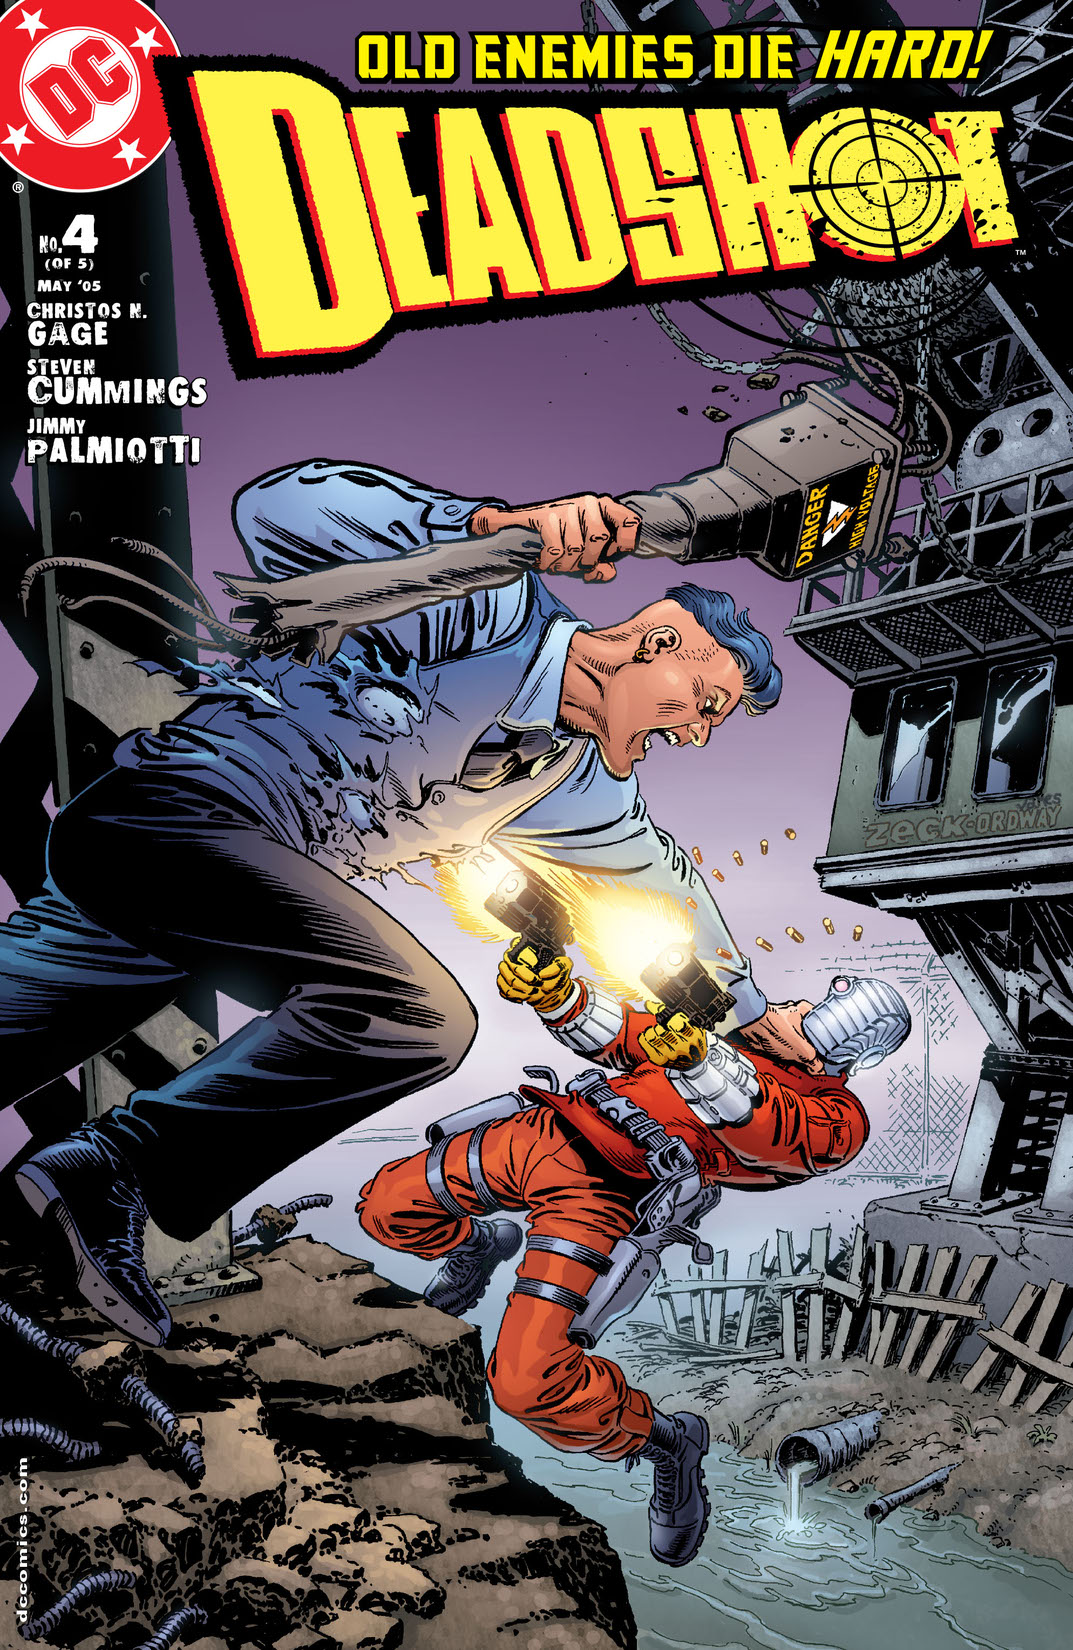 Deadshot (2004-) #4 preview images